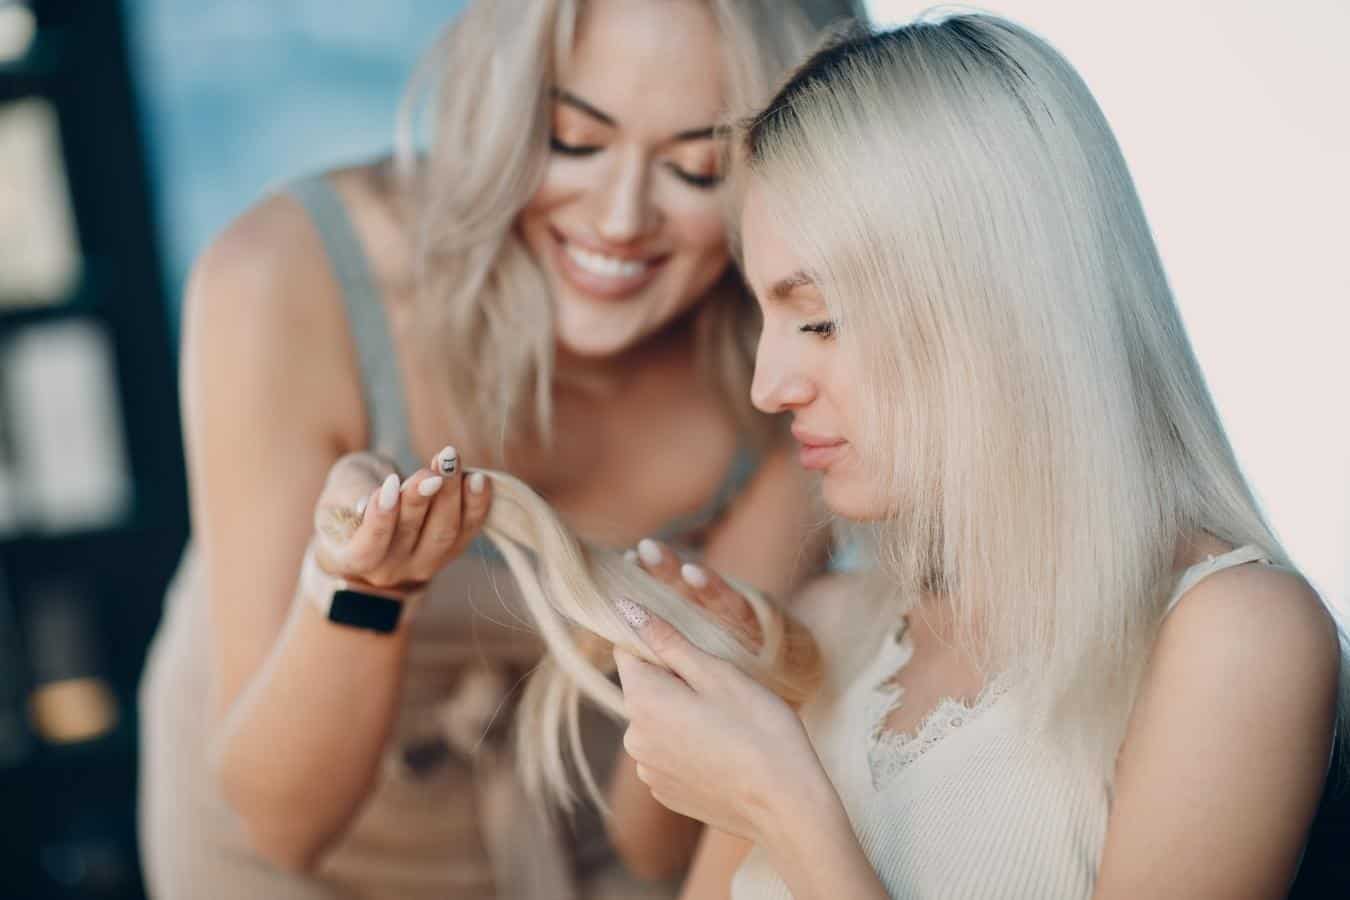 Two women looking at the ends of their hair